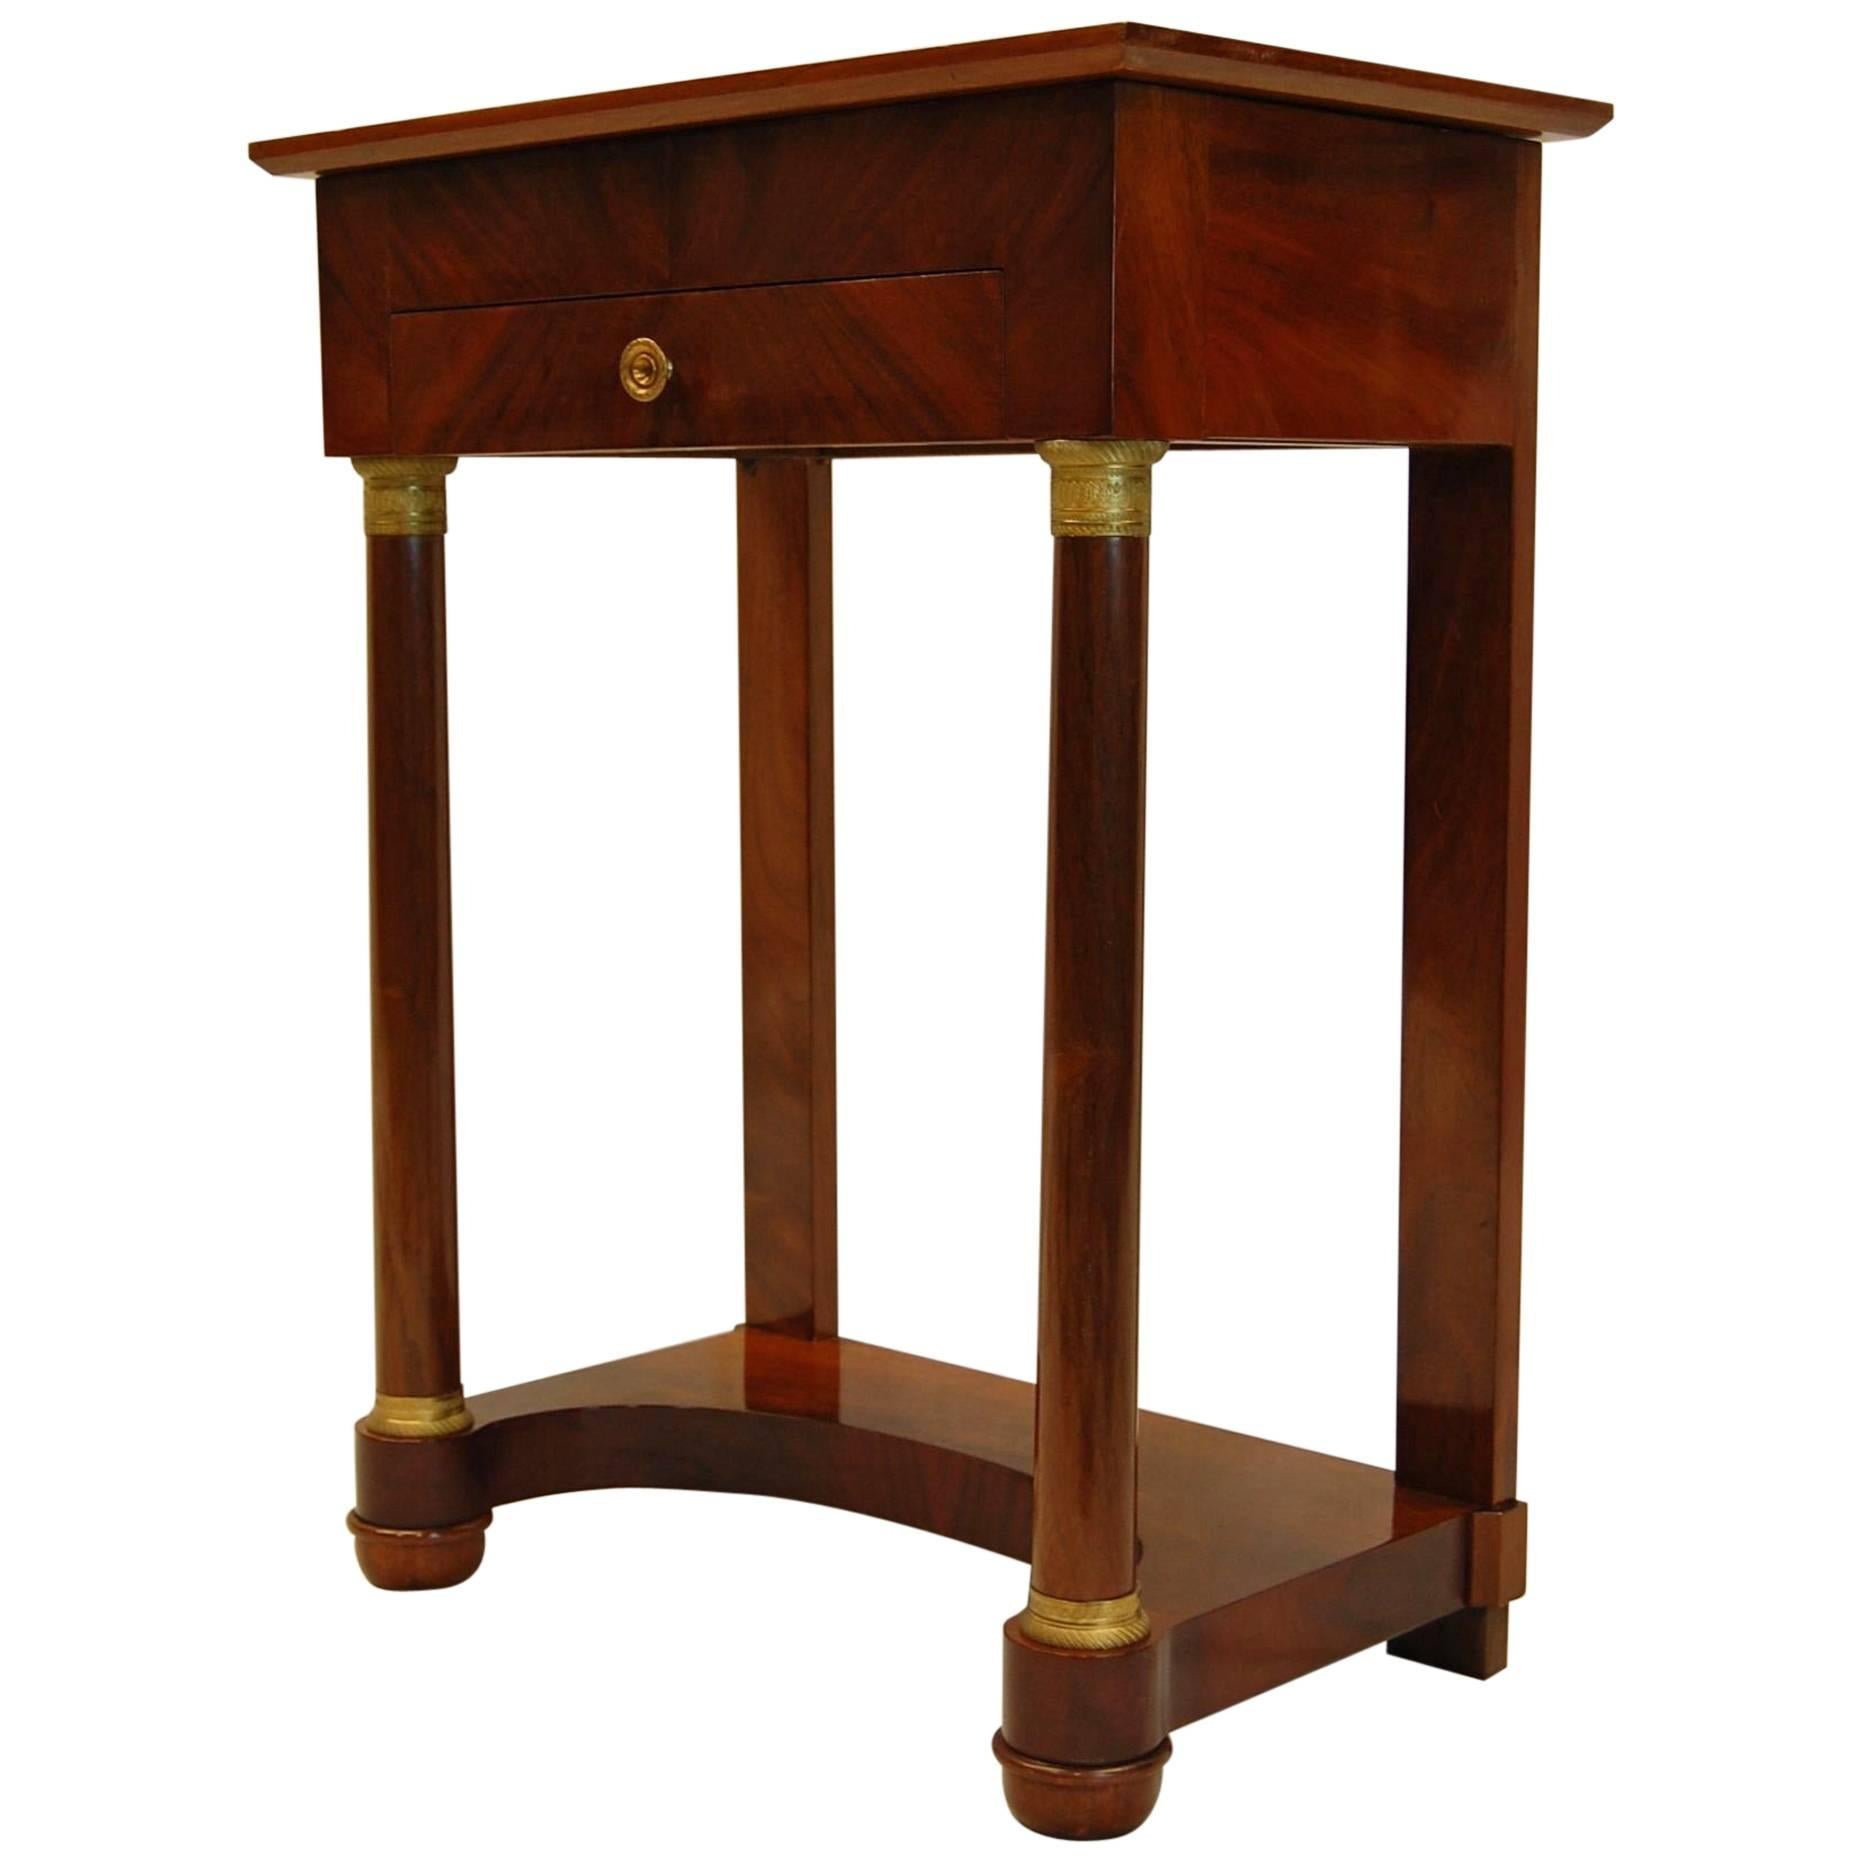 Empire Mahogany Sewing or Dressing Table with Drawer and Flip-Up Top, circa 1880